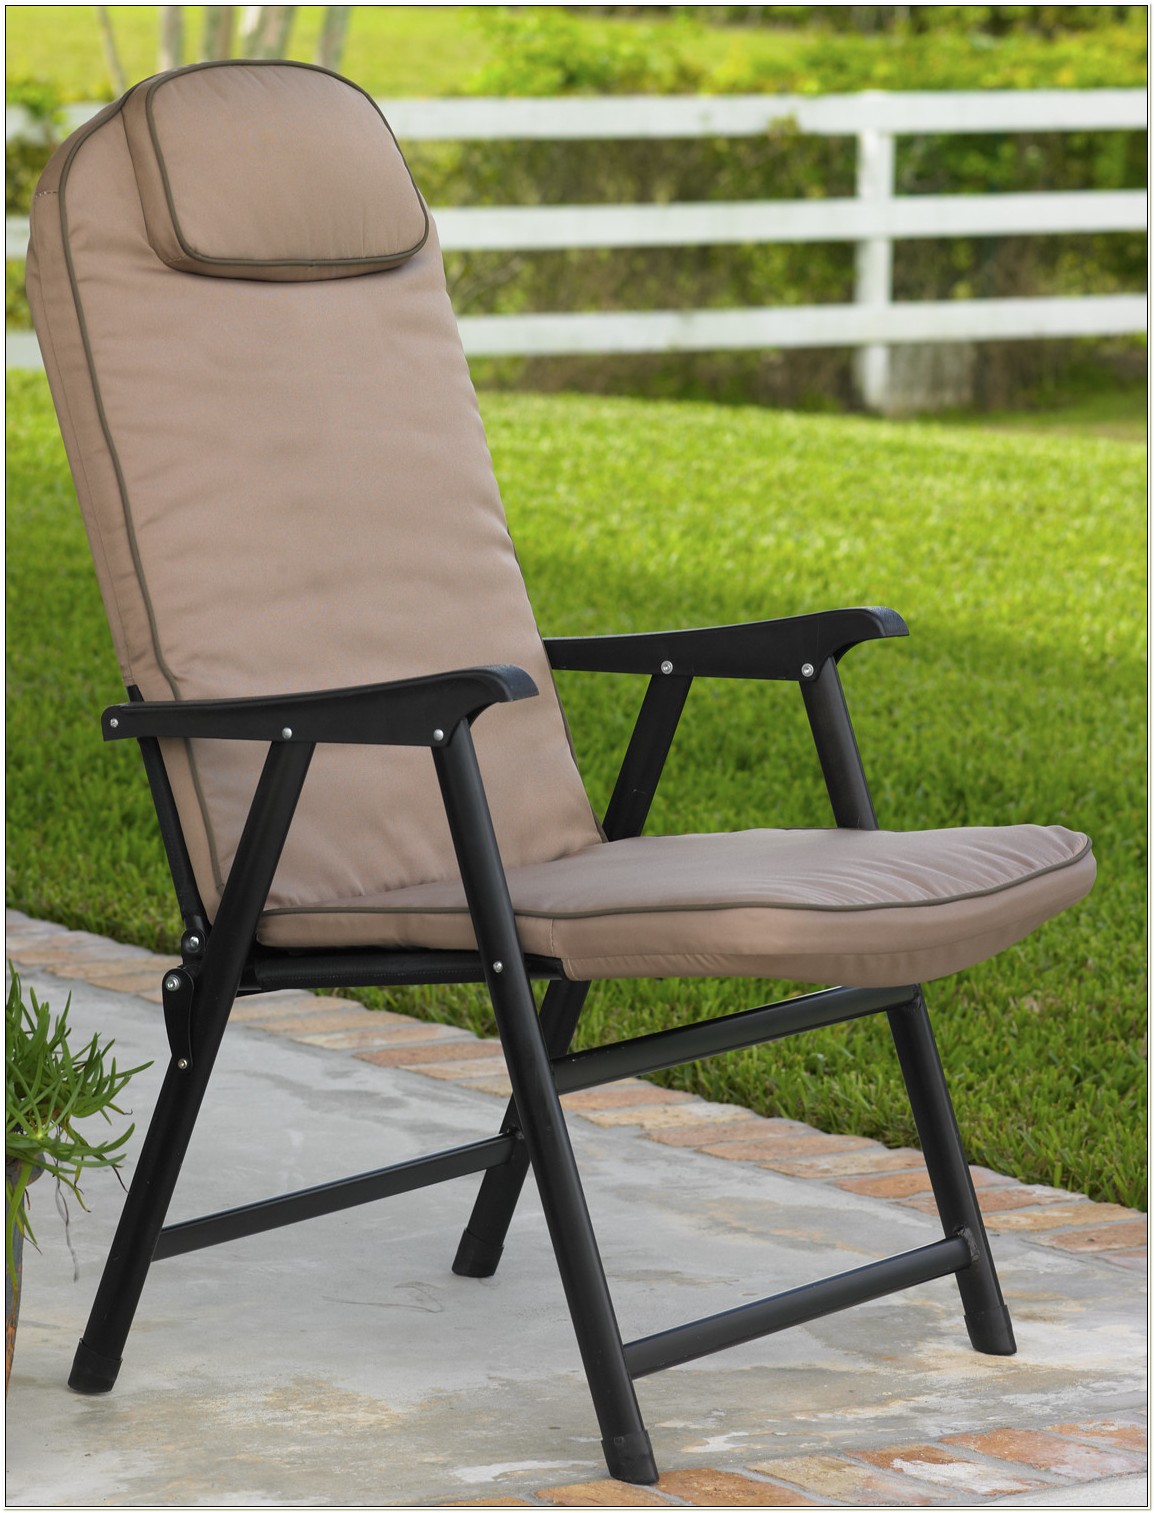 Big Man Folding Lawn Chair Chairs Home Decorating